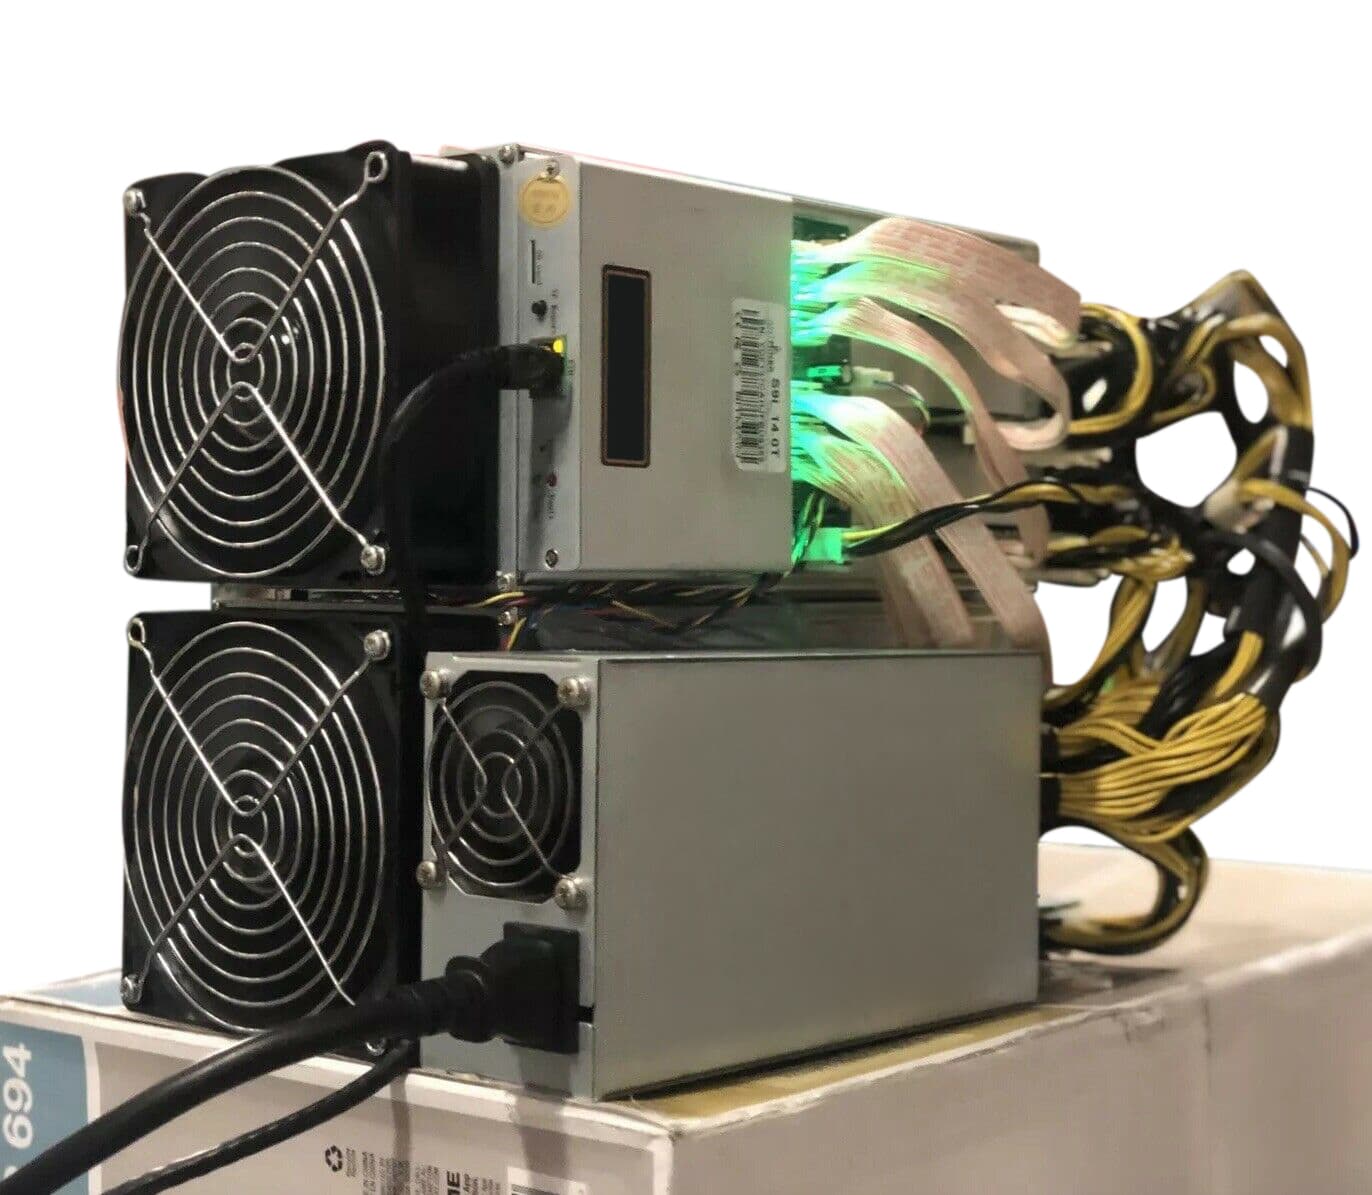 Antminer S9 Cgminer Firmware